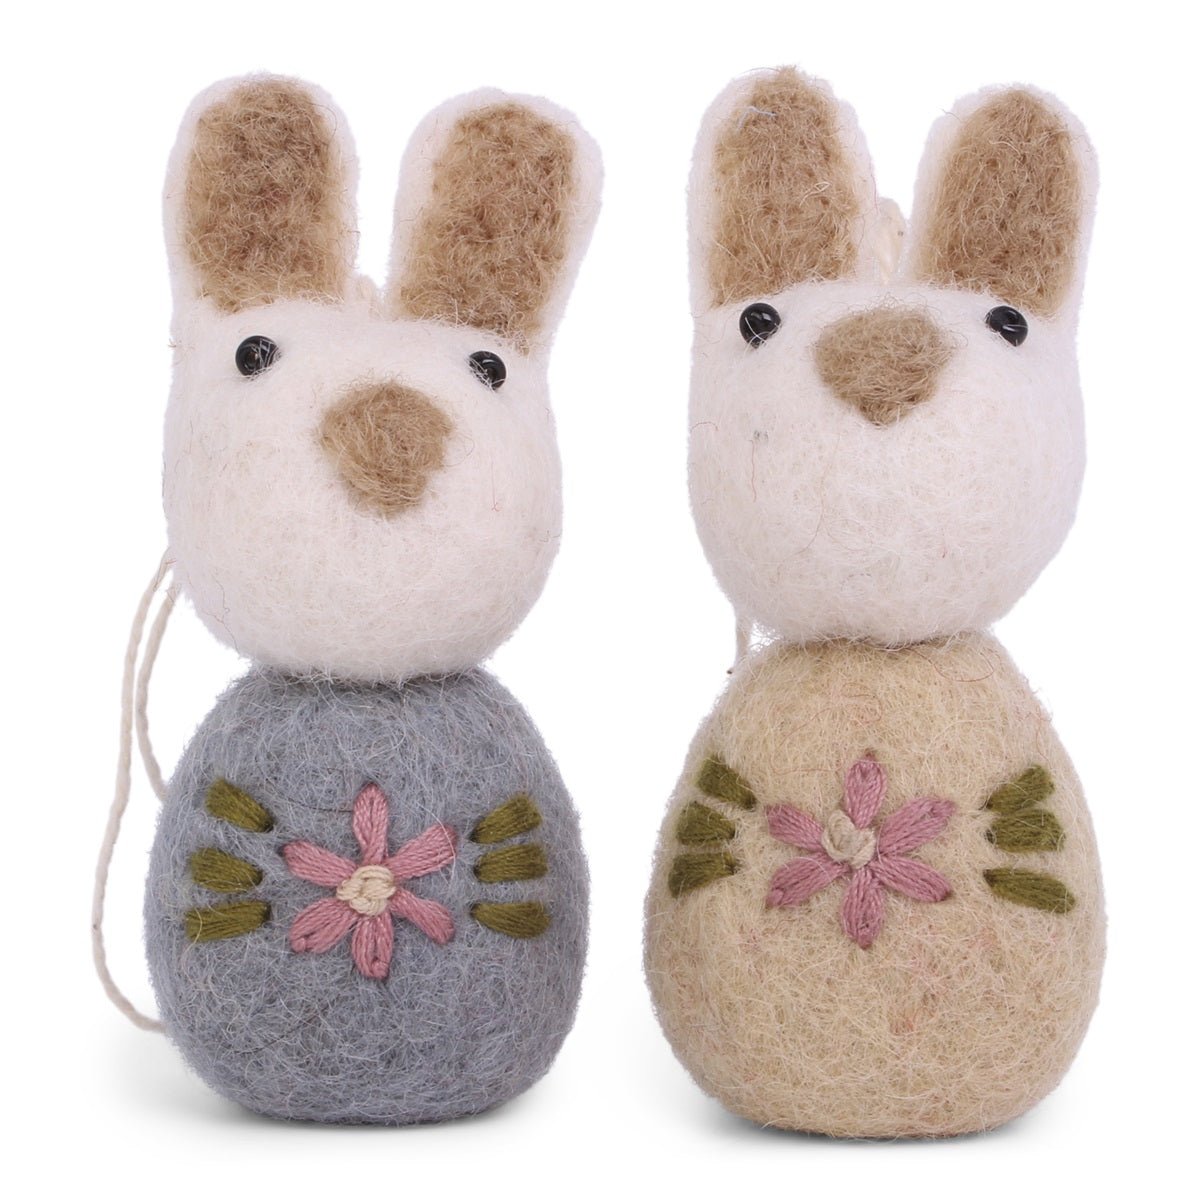 Bunny Set with Embroidery (Set of 2) by Én Gry & Sif - Maude Kids Decor